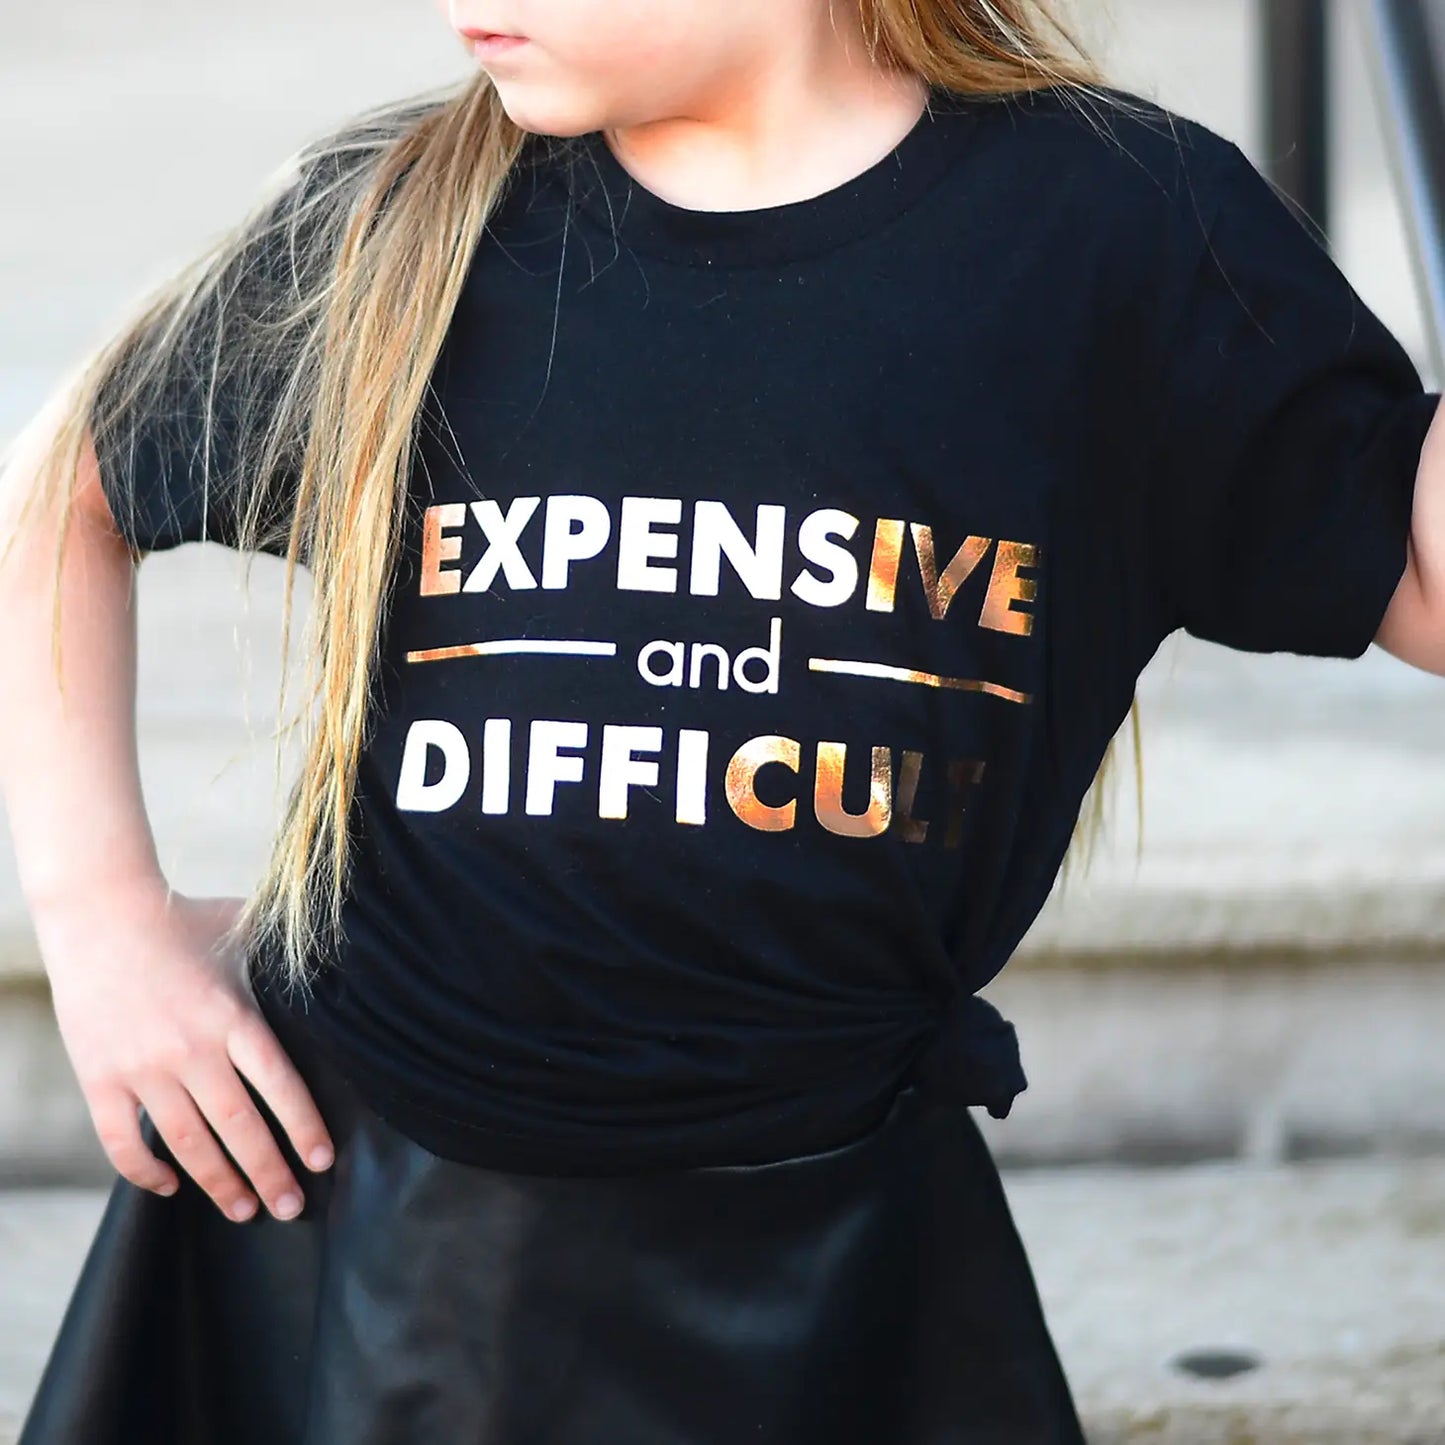 Expensive and Difficult Kid's Tee Shirt